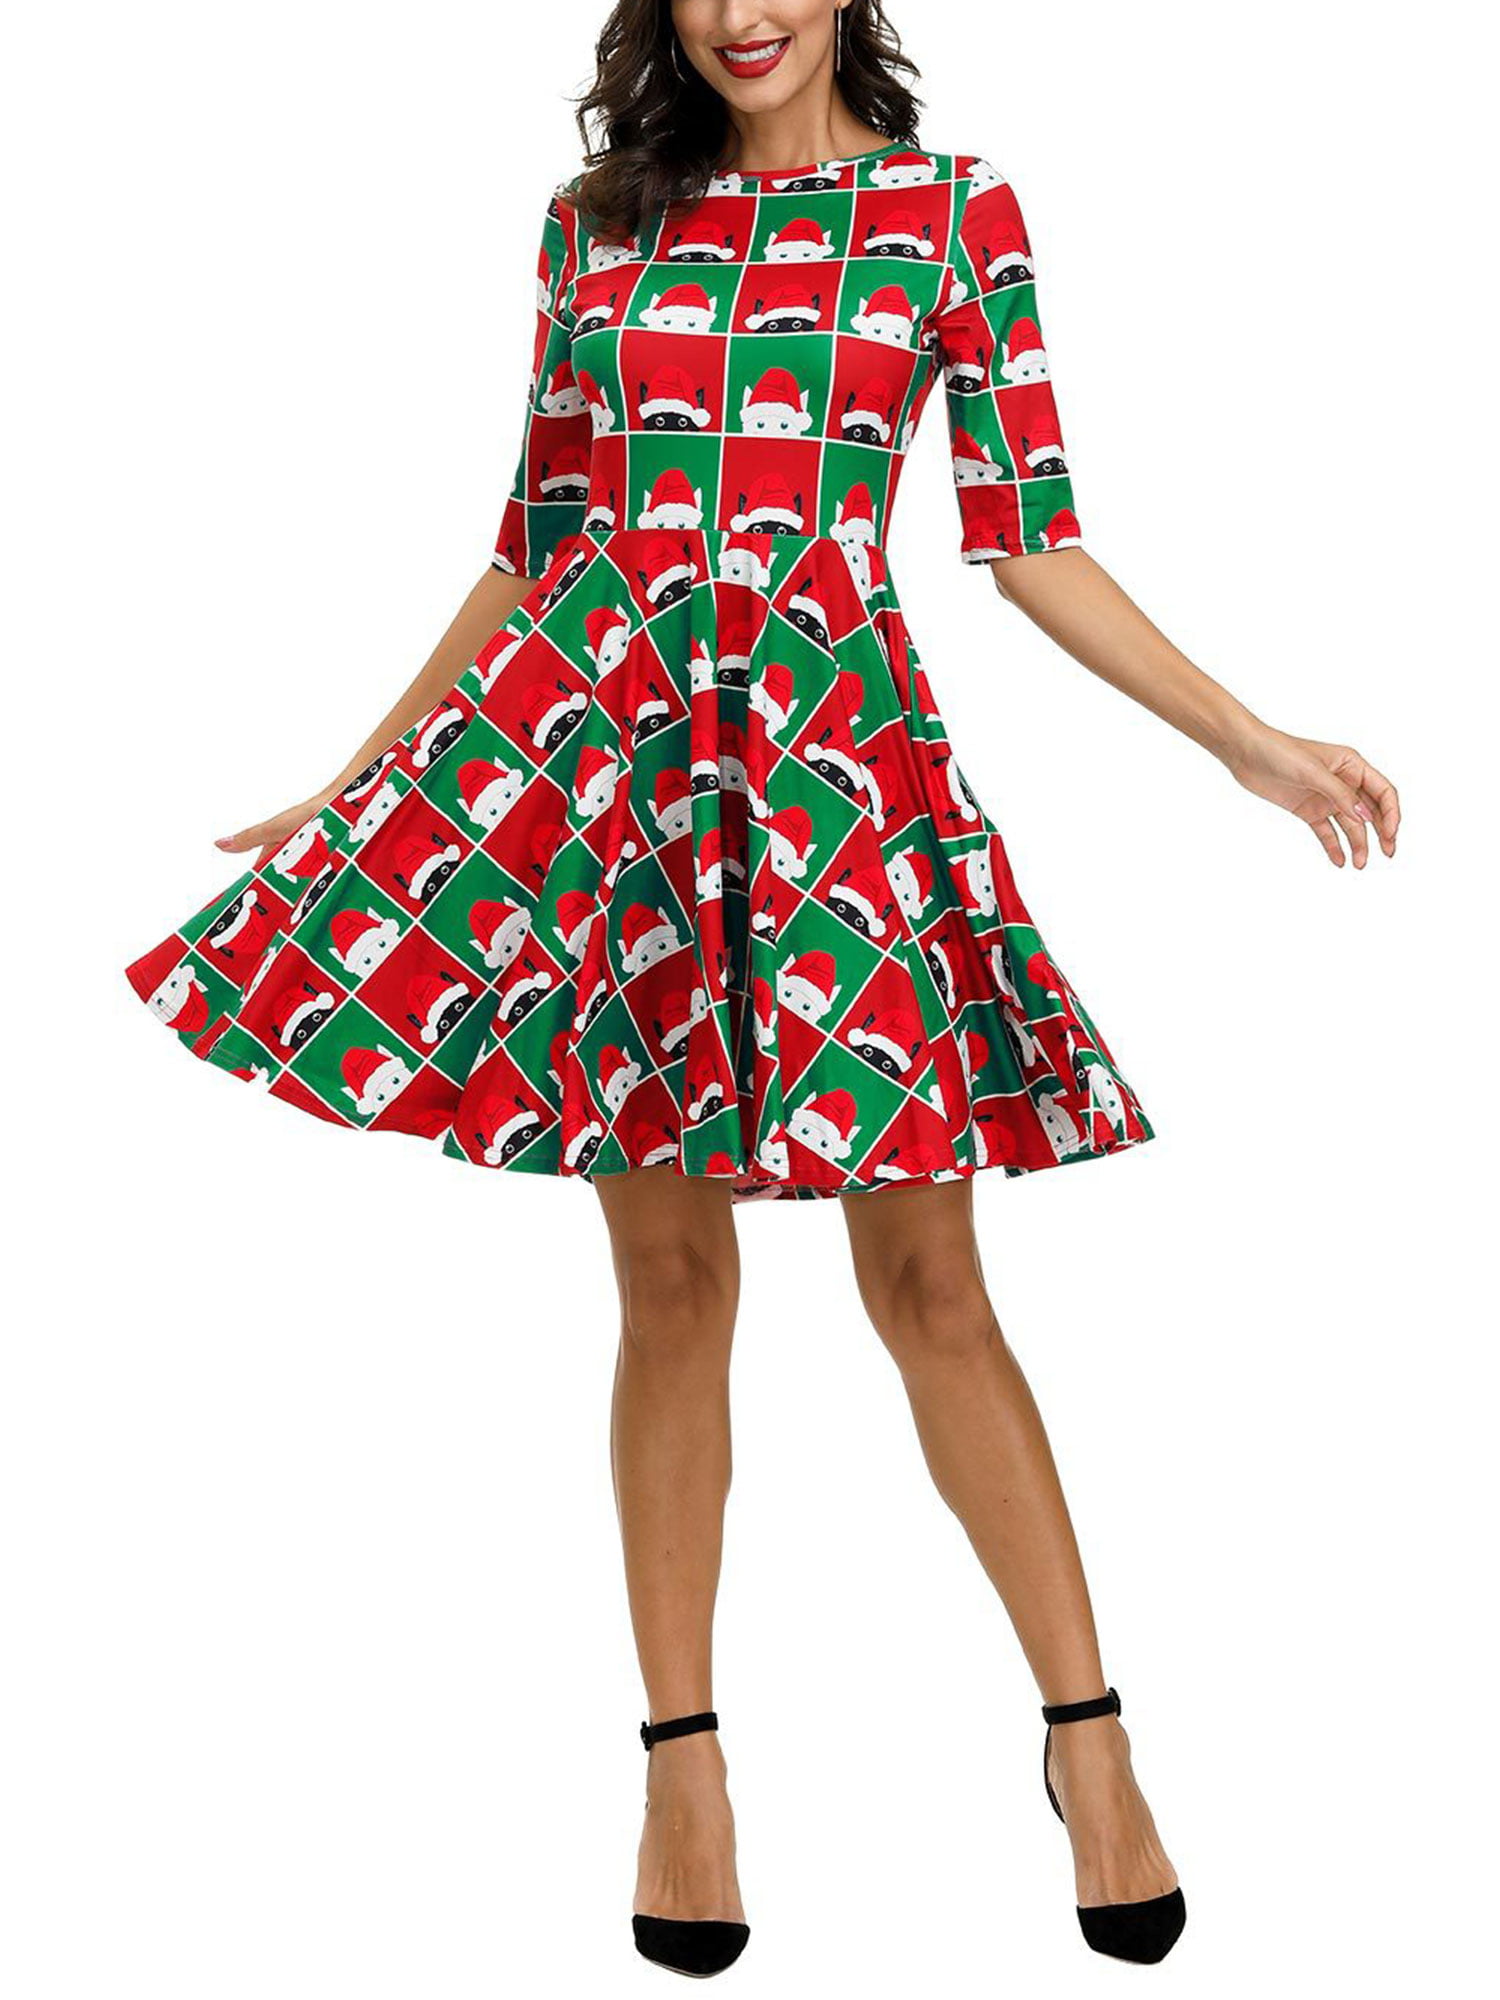 Womens Christmas Dress Reindeer Elk Striped Printed Xmas Holiday Pleated Dress 1950s Vintage V Neck Short Sleeves Evening Party High Waist A Line Dresses Casual Cocktail Prom Swing Gown